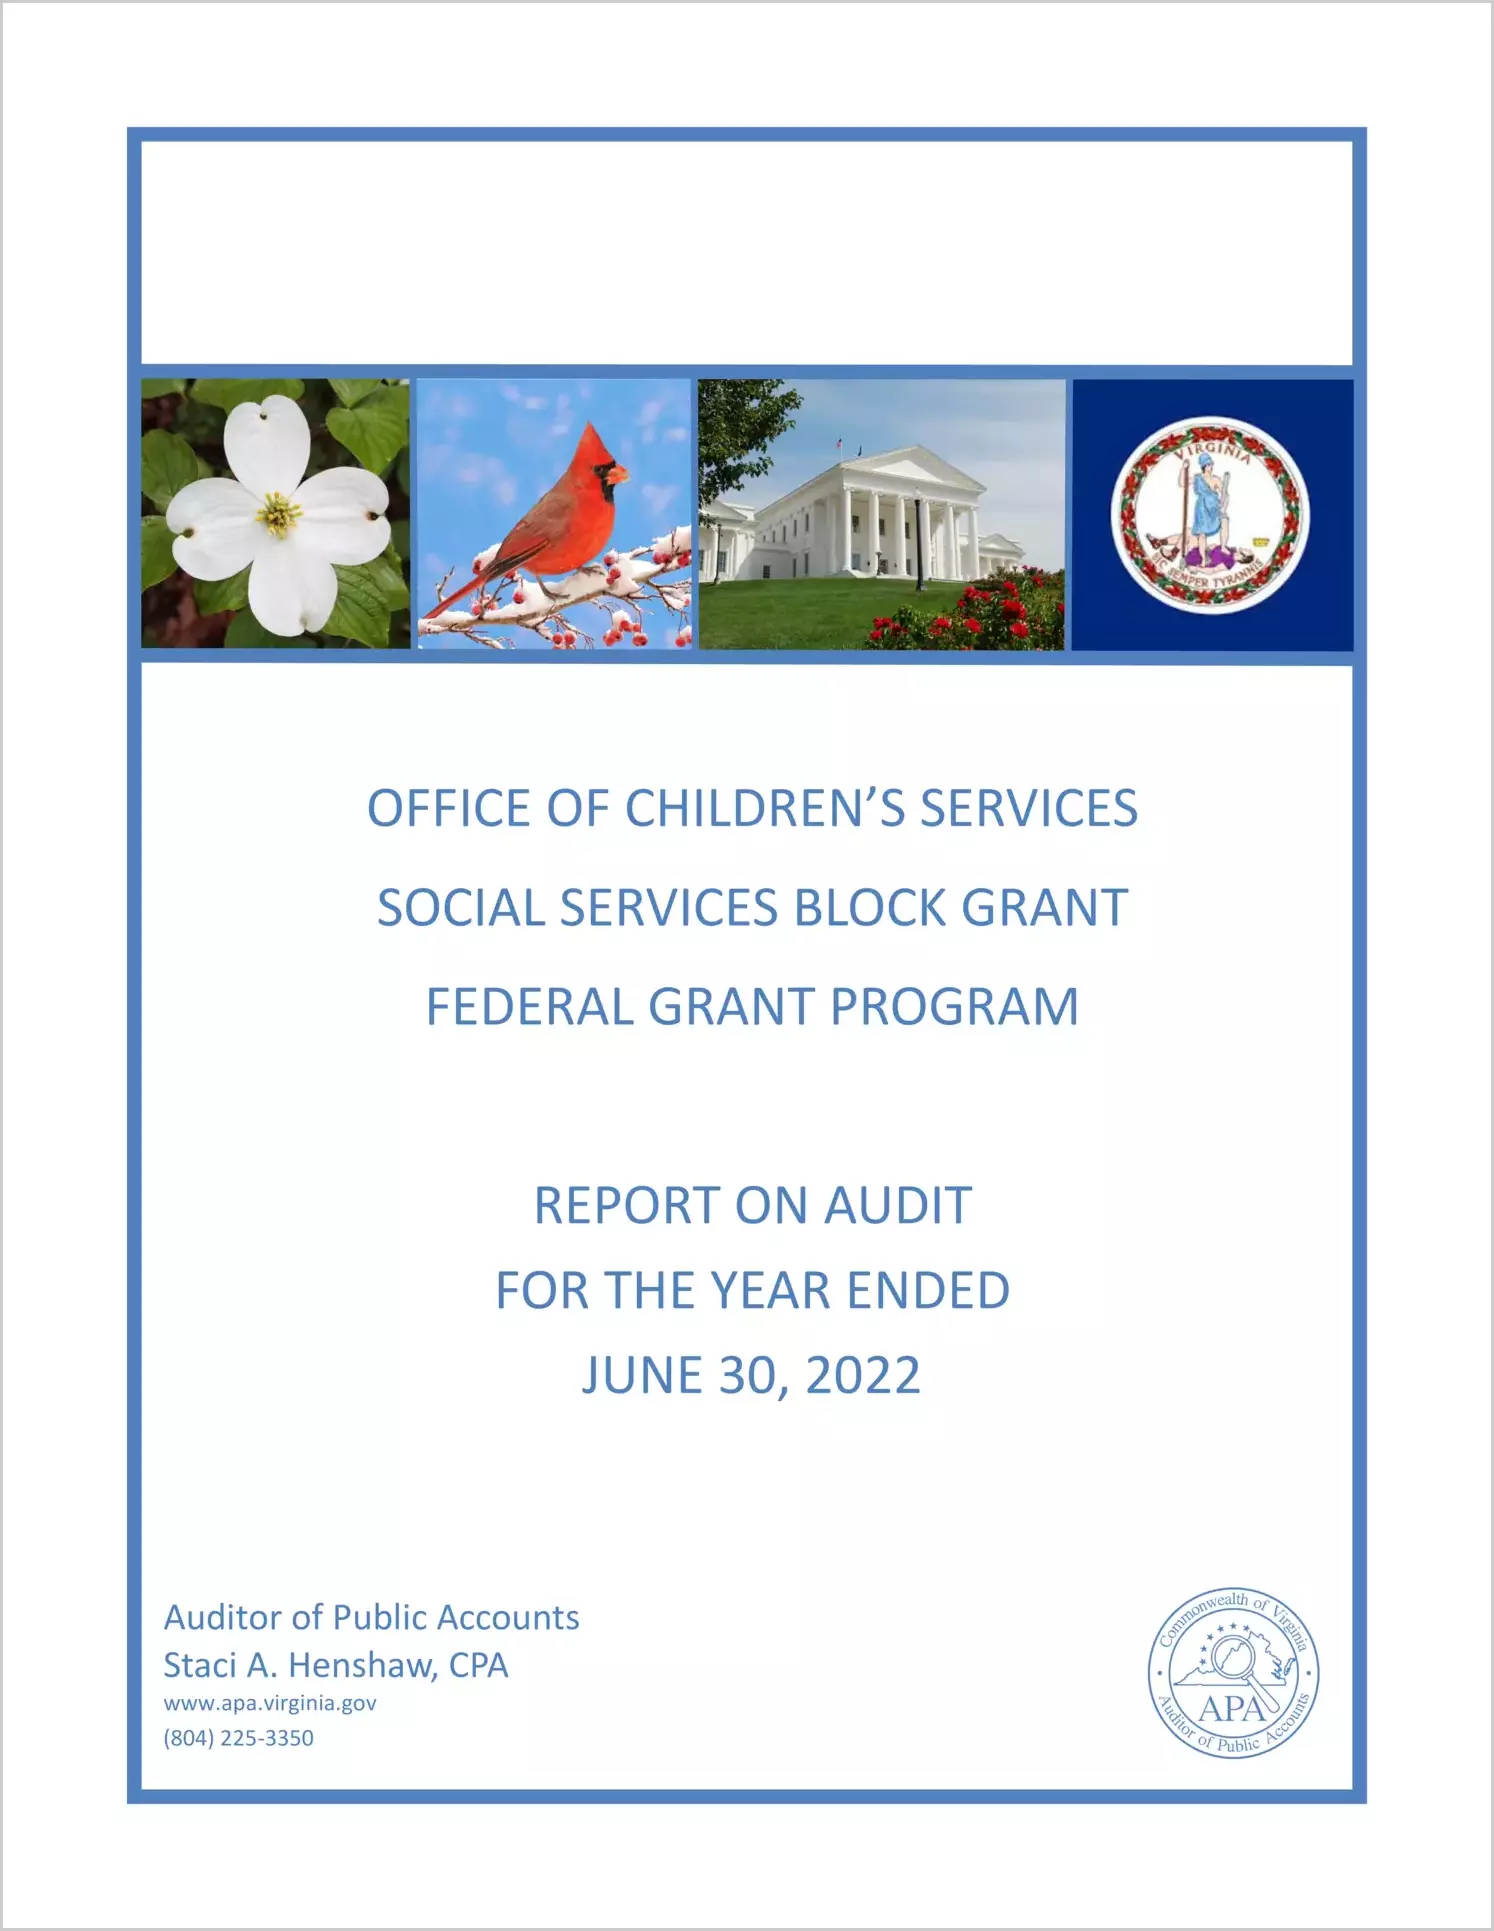 Office of Children's Services Social Services Block Grant Federal Grant Program for the year ended June 30, 2022